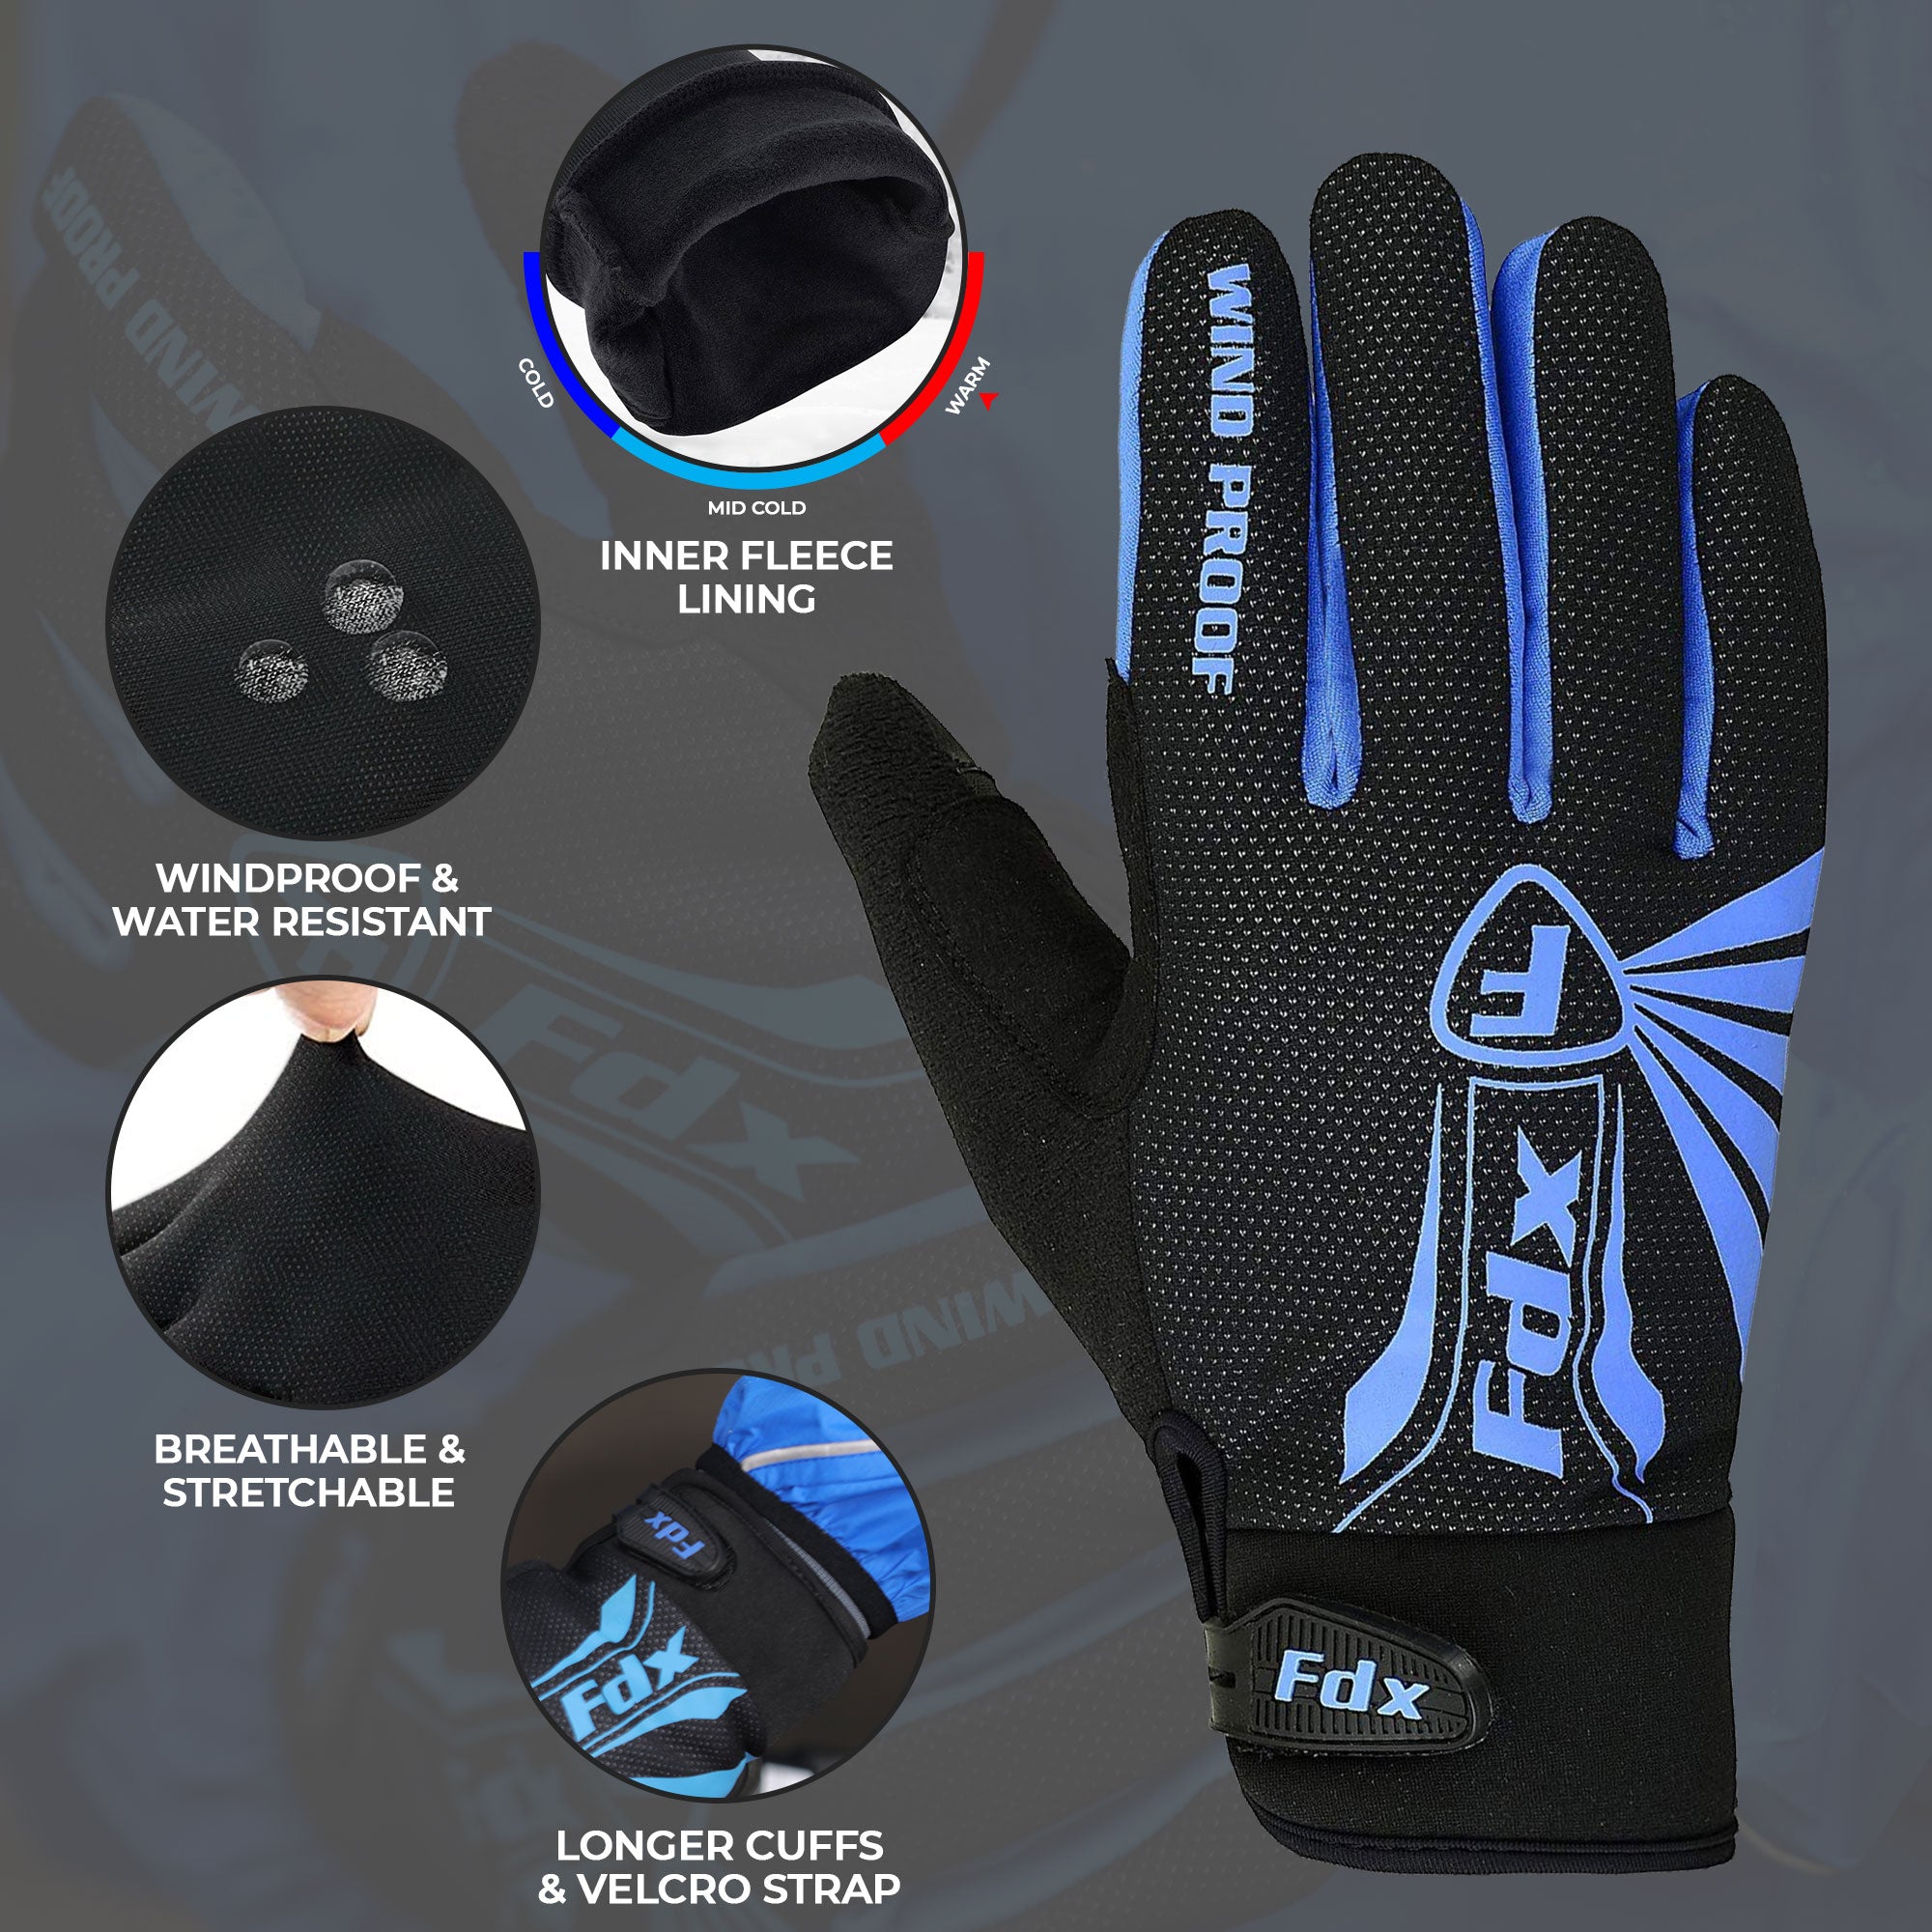 Fdx Black & Blue Full Finger Cycling Gloves for Winter MTB Road Bike Reflective Thermal & Touch Screen - Zesto